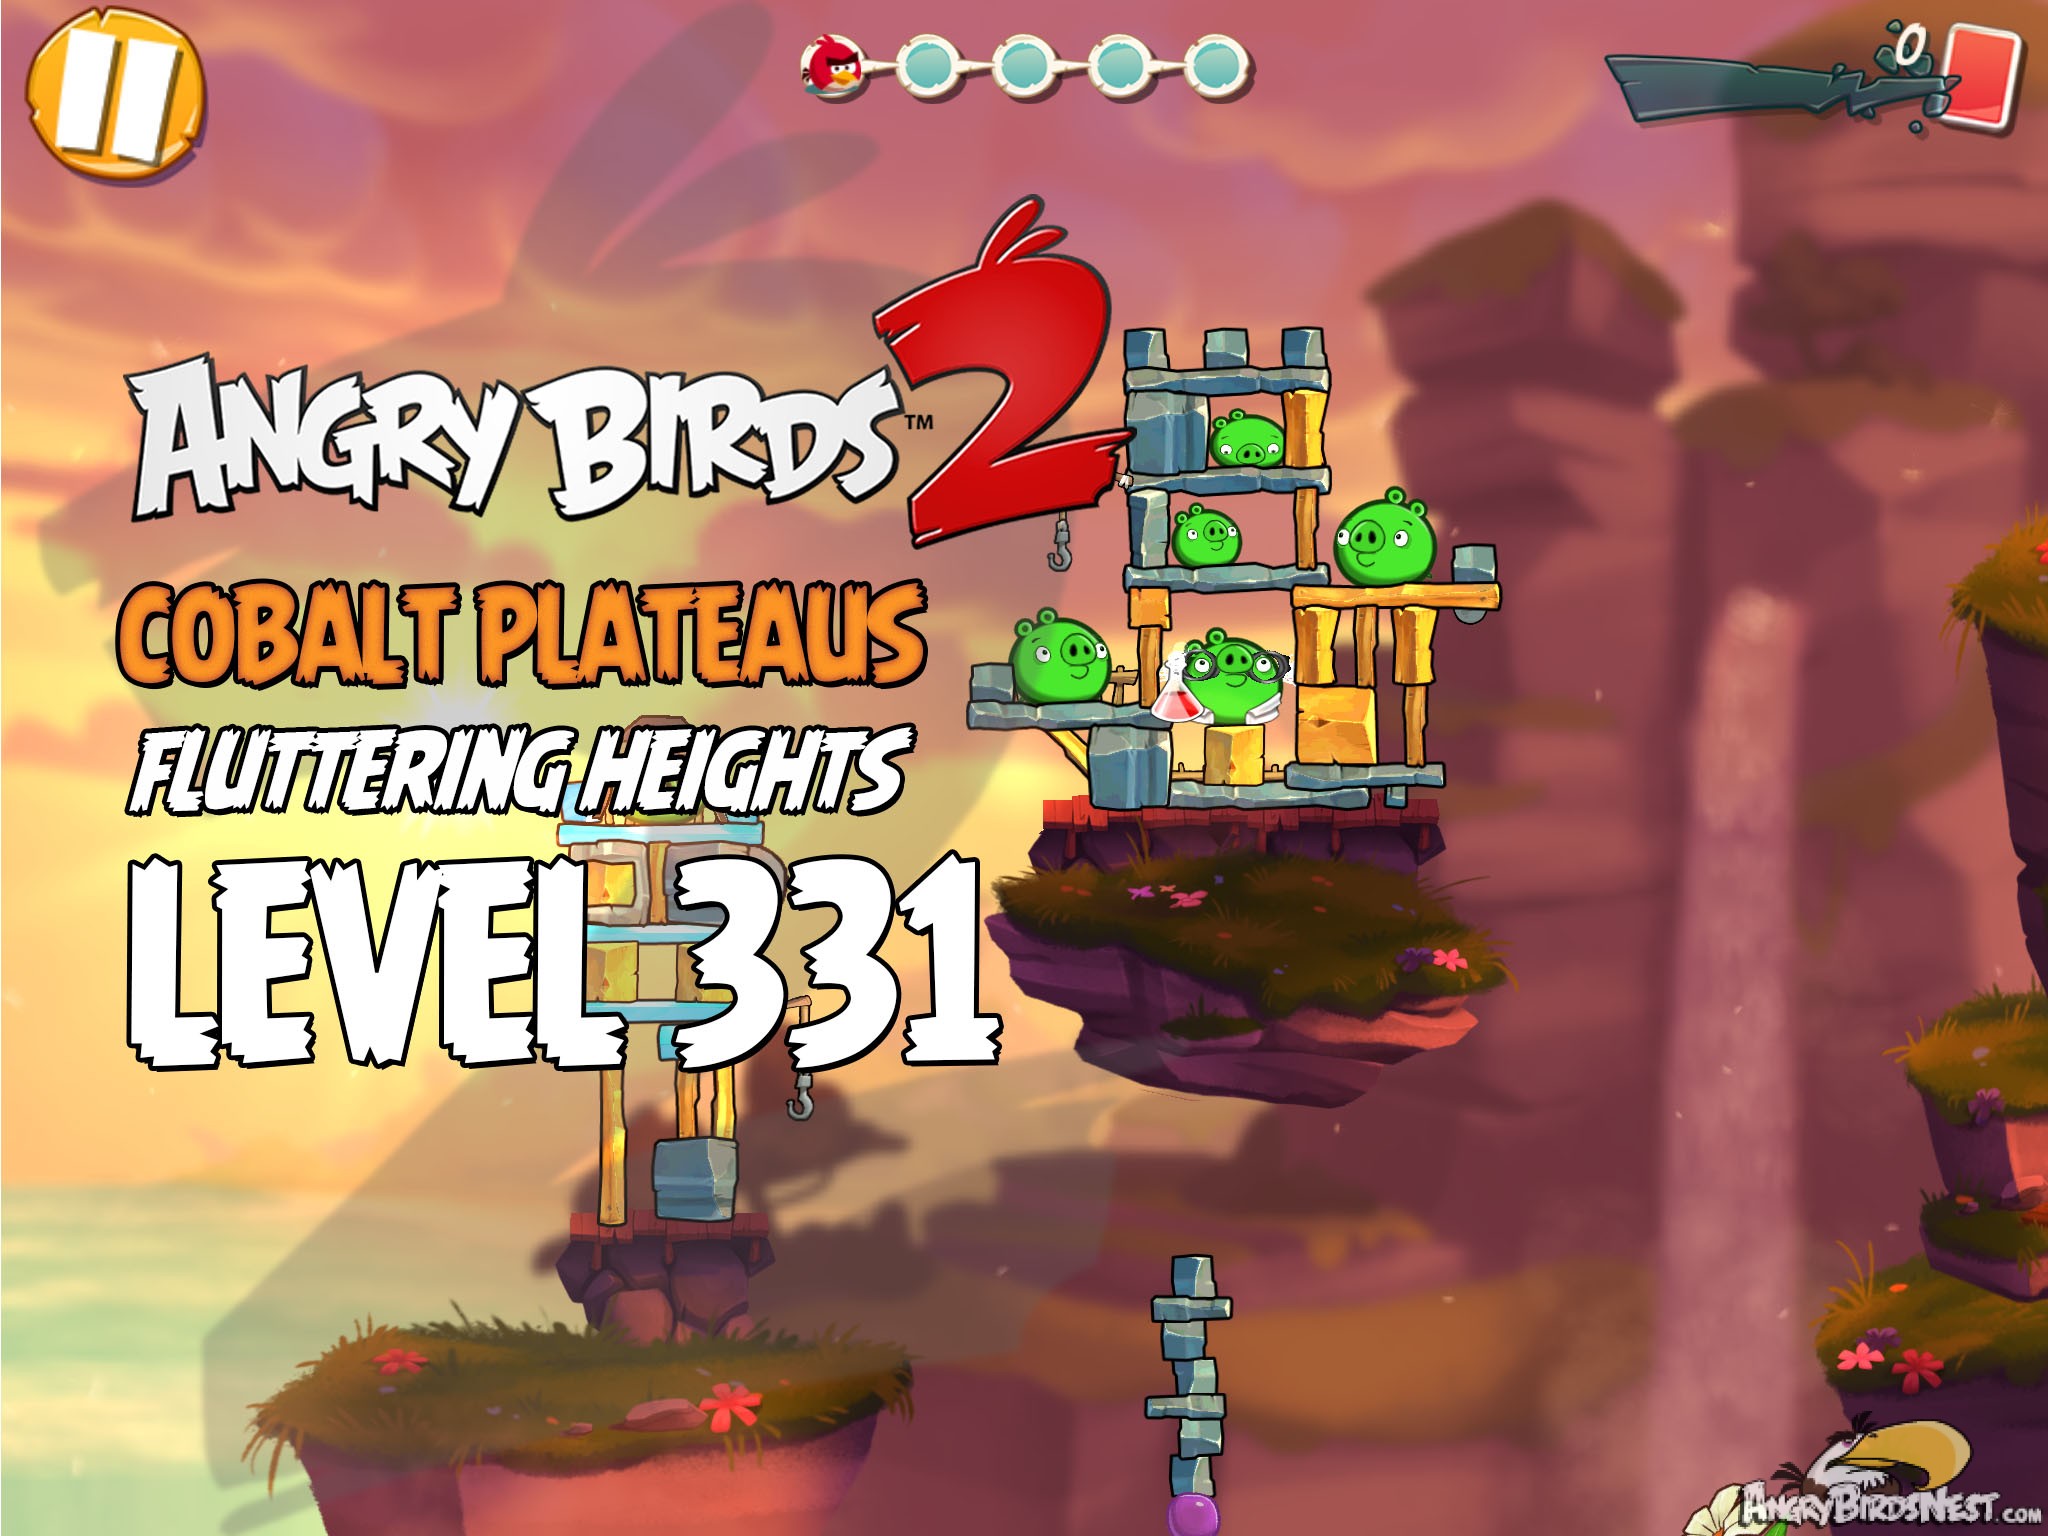 Angry Birds 2 Level 331 Cobalt Plateaus Fluttering Heights Image